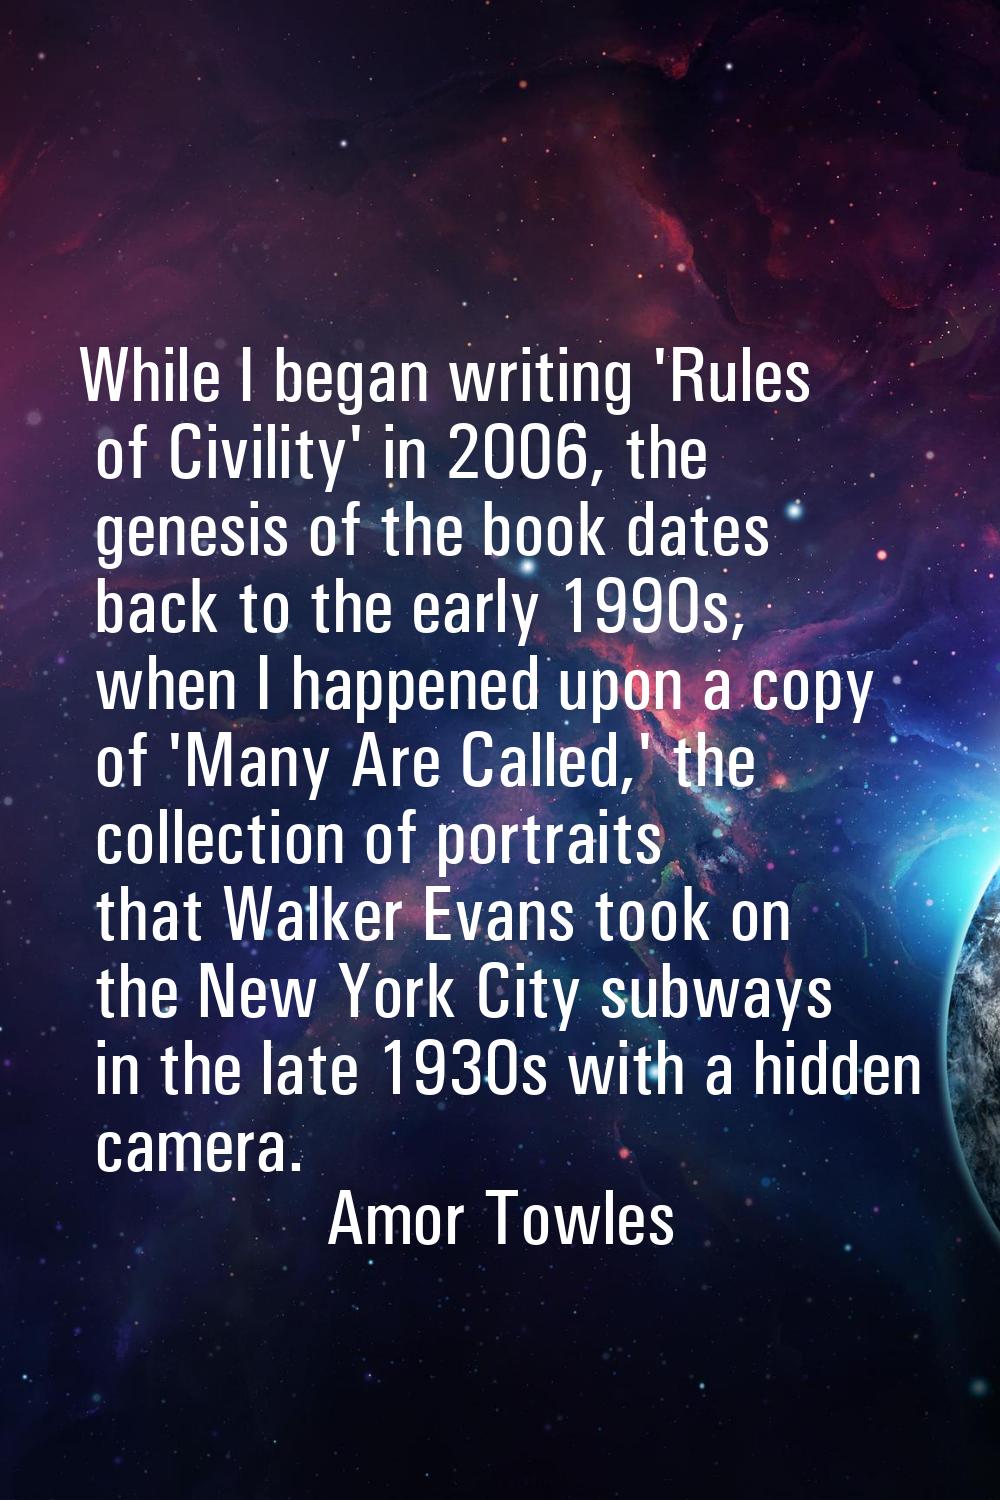 While I began writing 'Rules of Civility' in 2006, the genesis of the book dates back to the early 